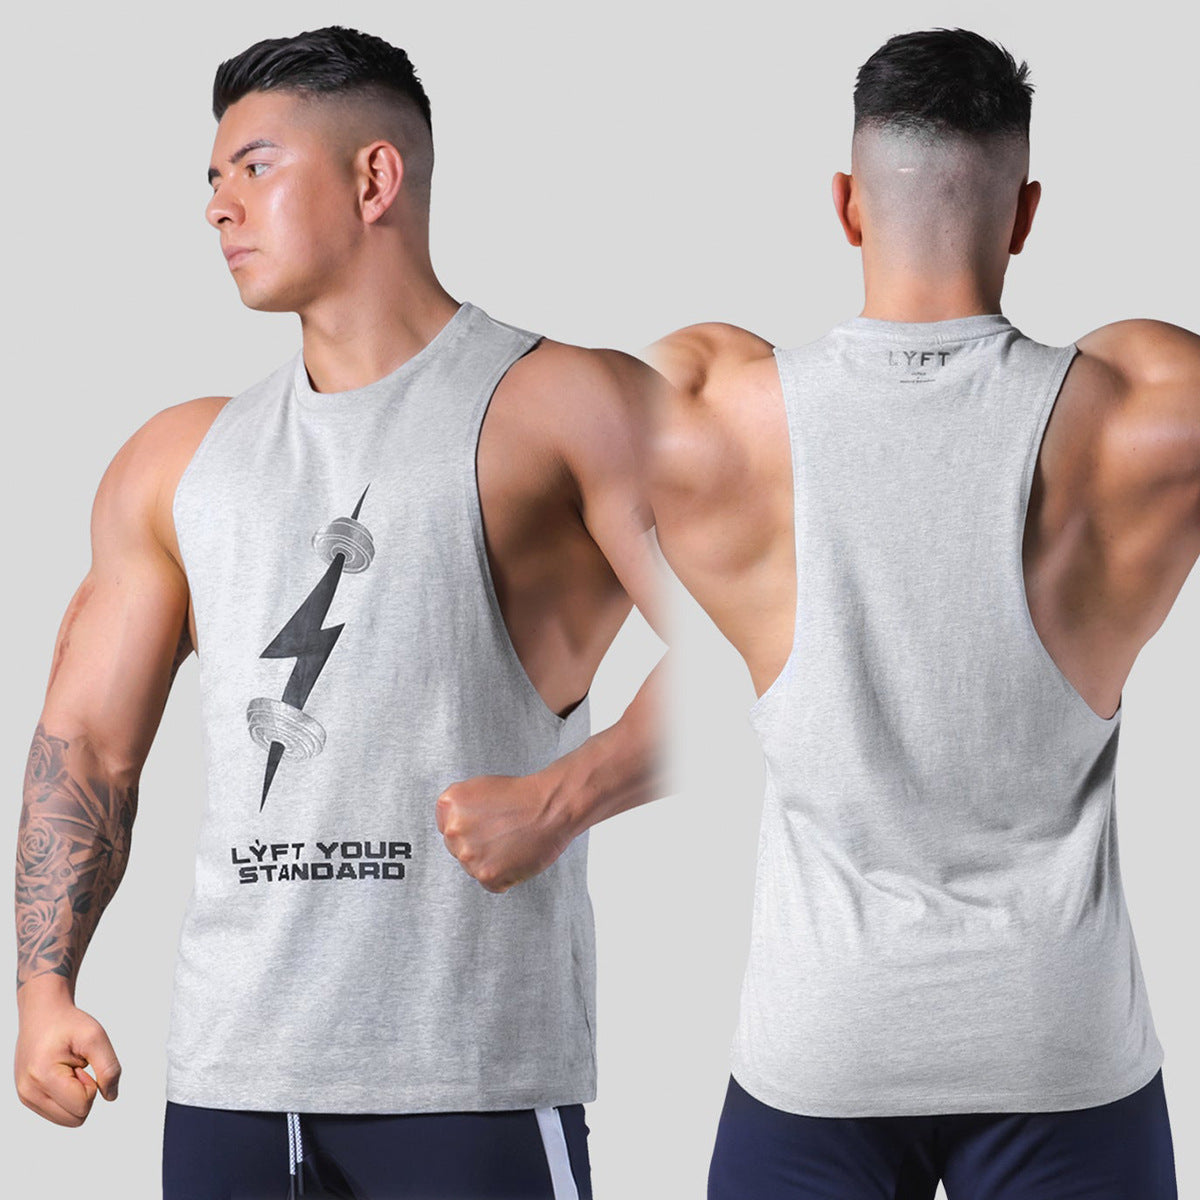 Sports Casual Vest Men's Exercise Fitness - Olic Home Fitness